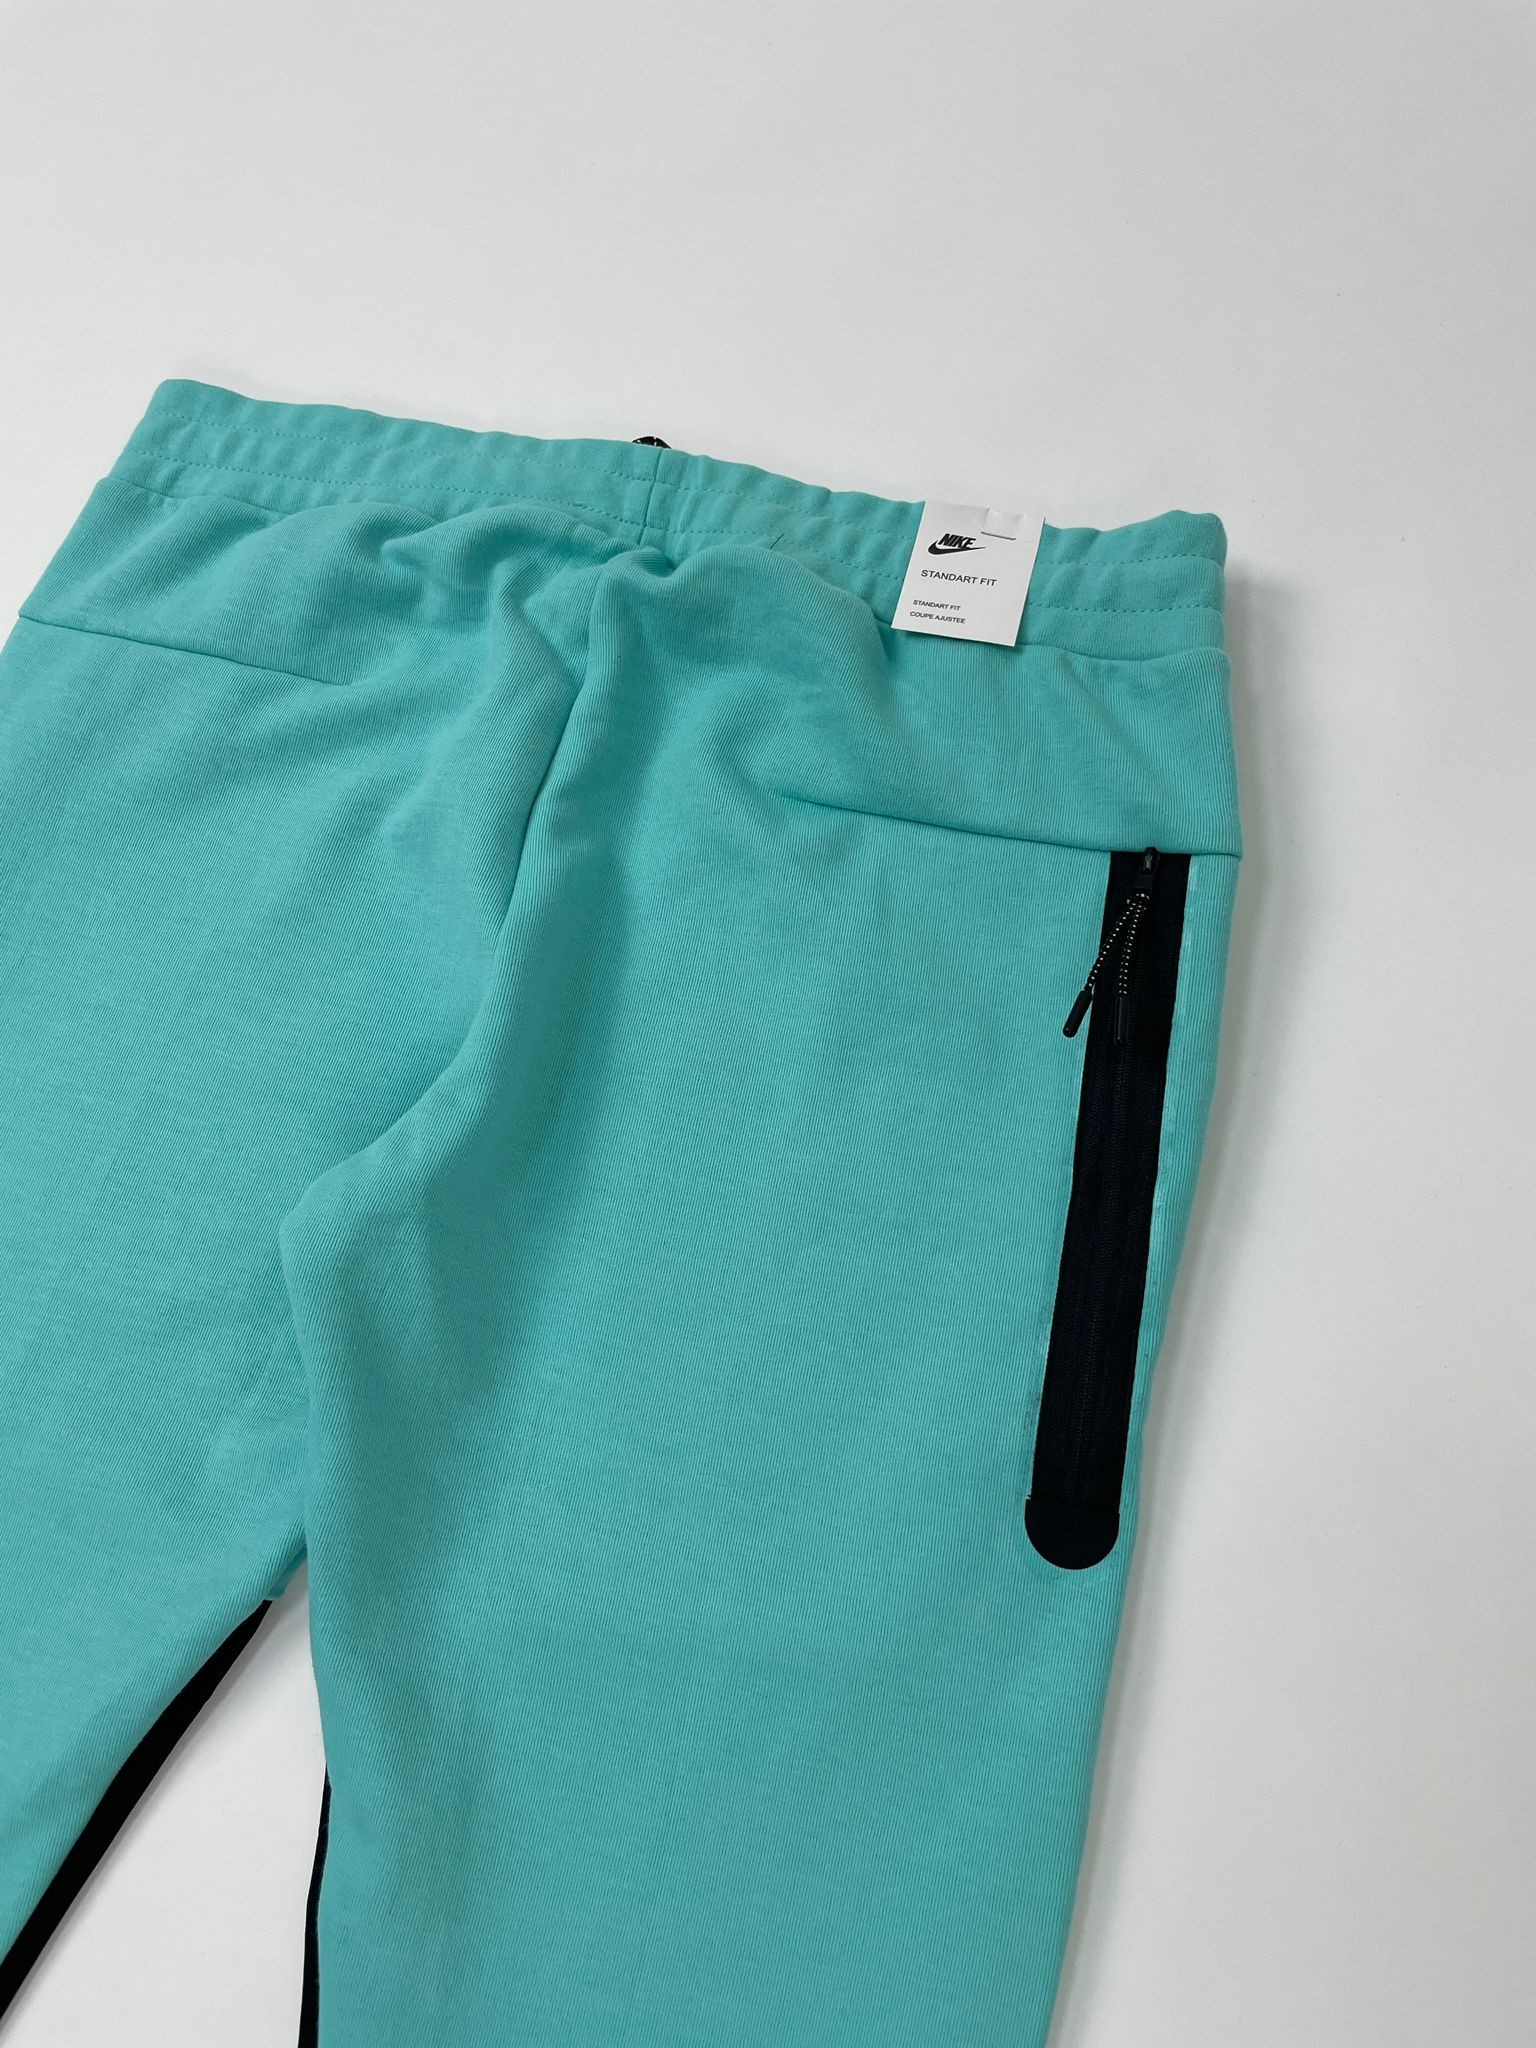 NSW Tech Fleece Jogger 2022 Washed Teal/Black